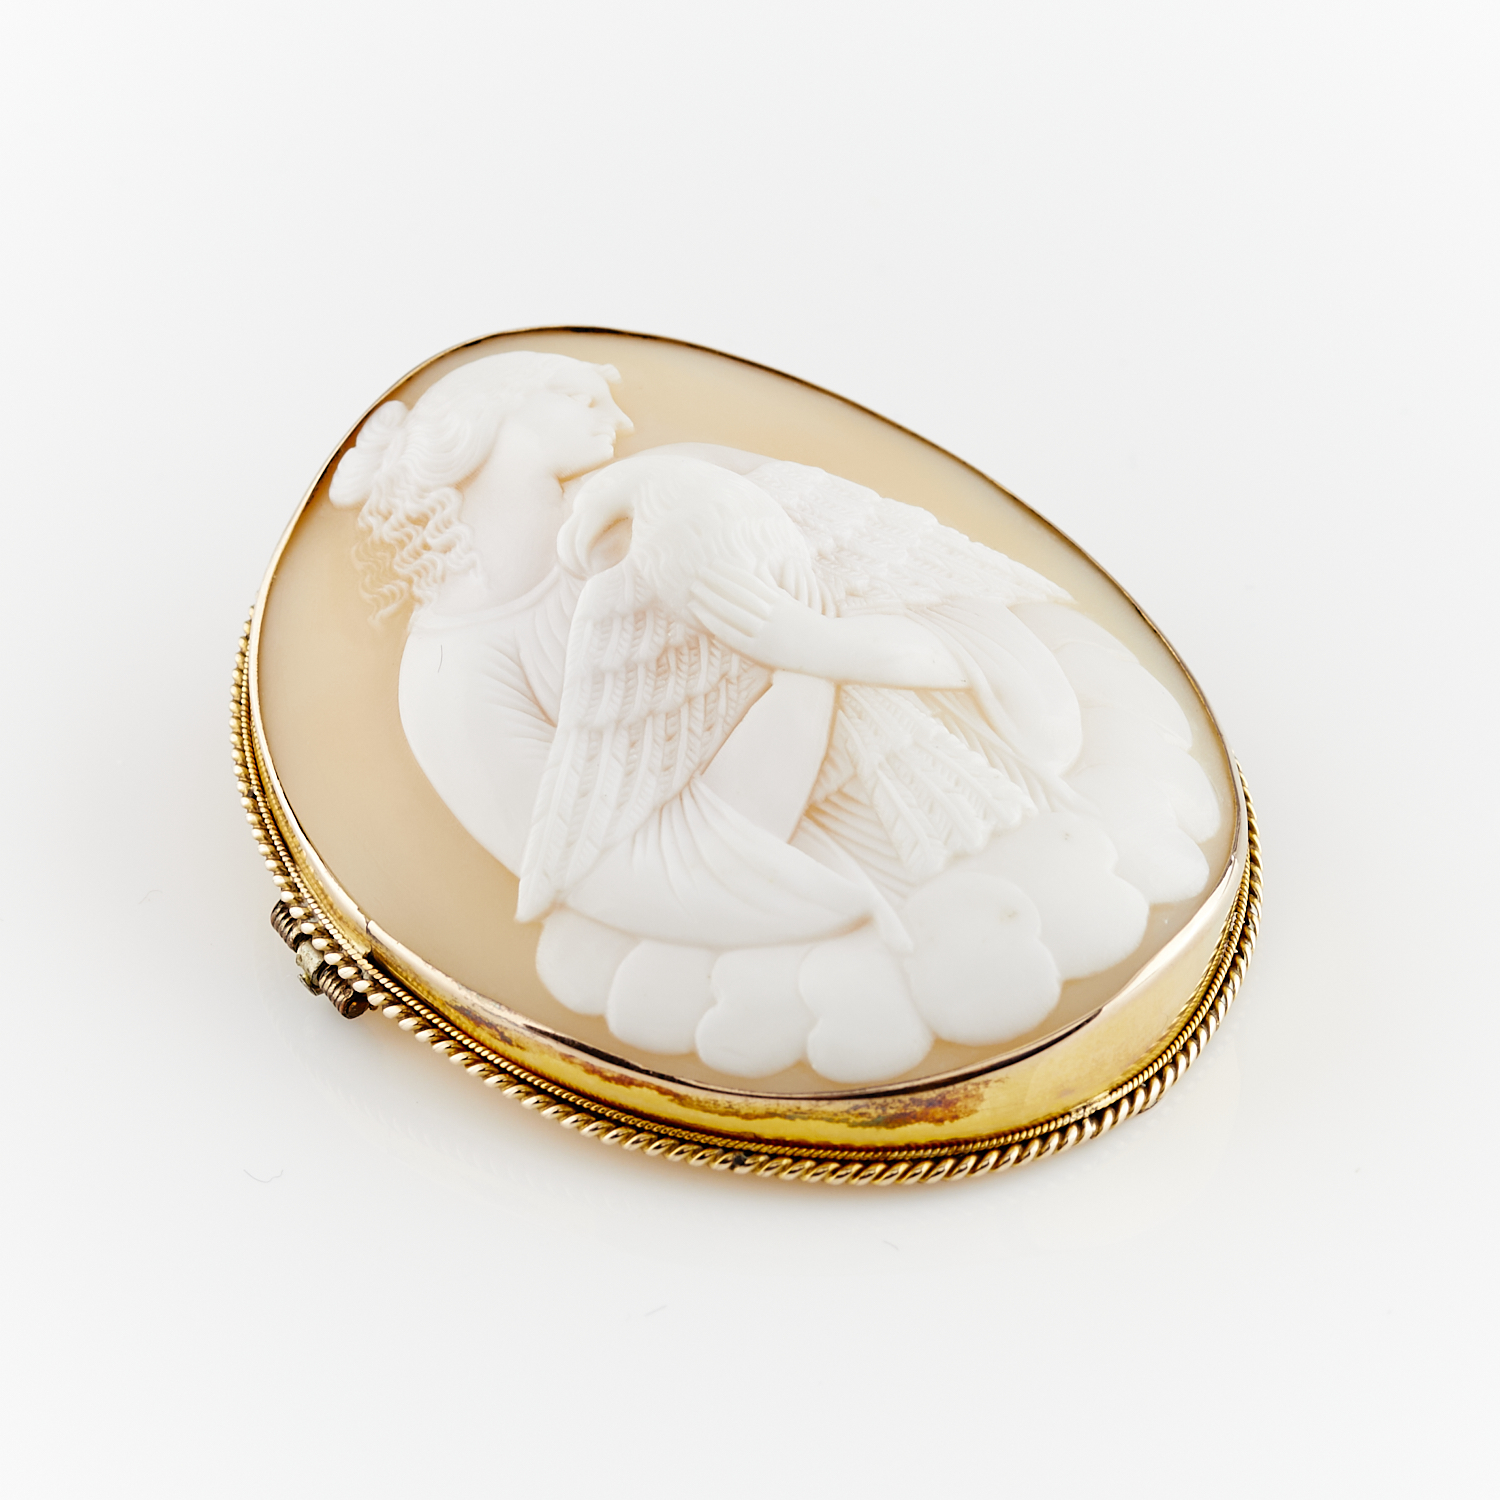 English 9ct Gold Cameo Brooch Depicting Hebe - Image 3 of 7